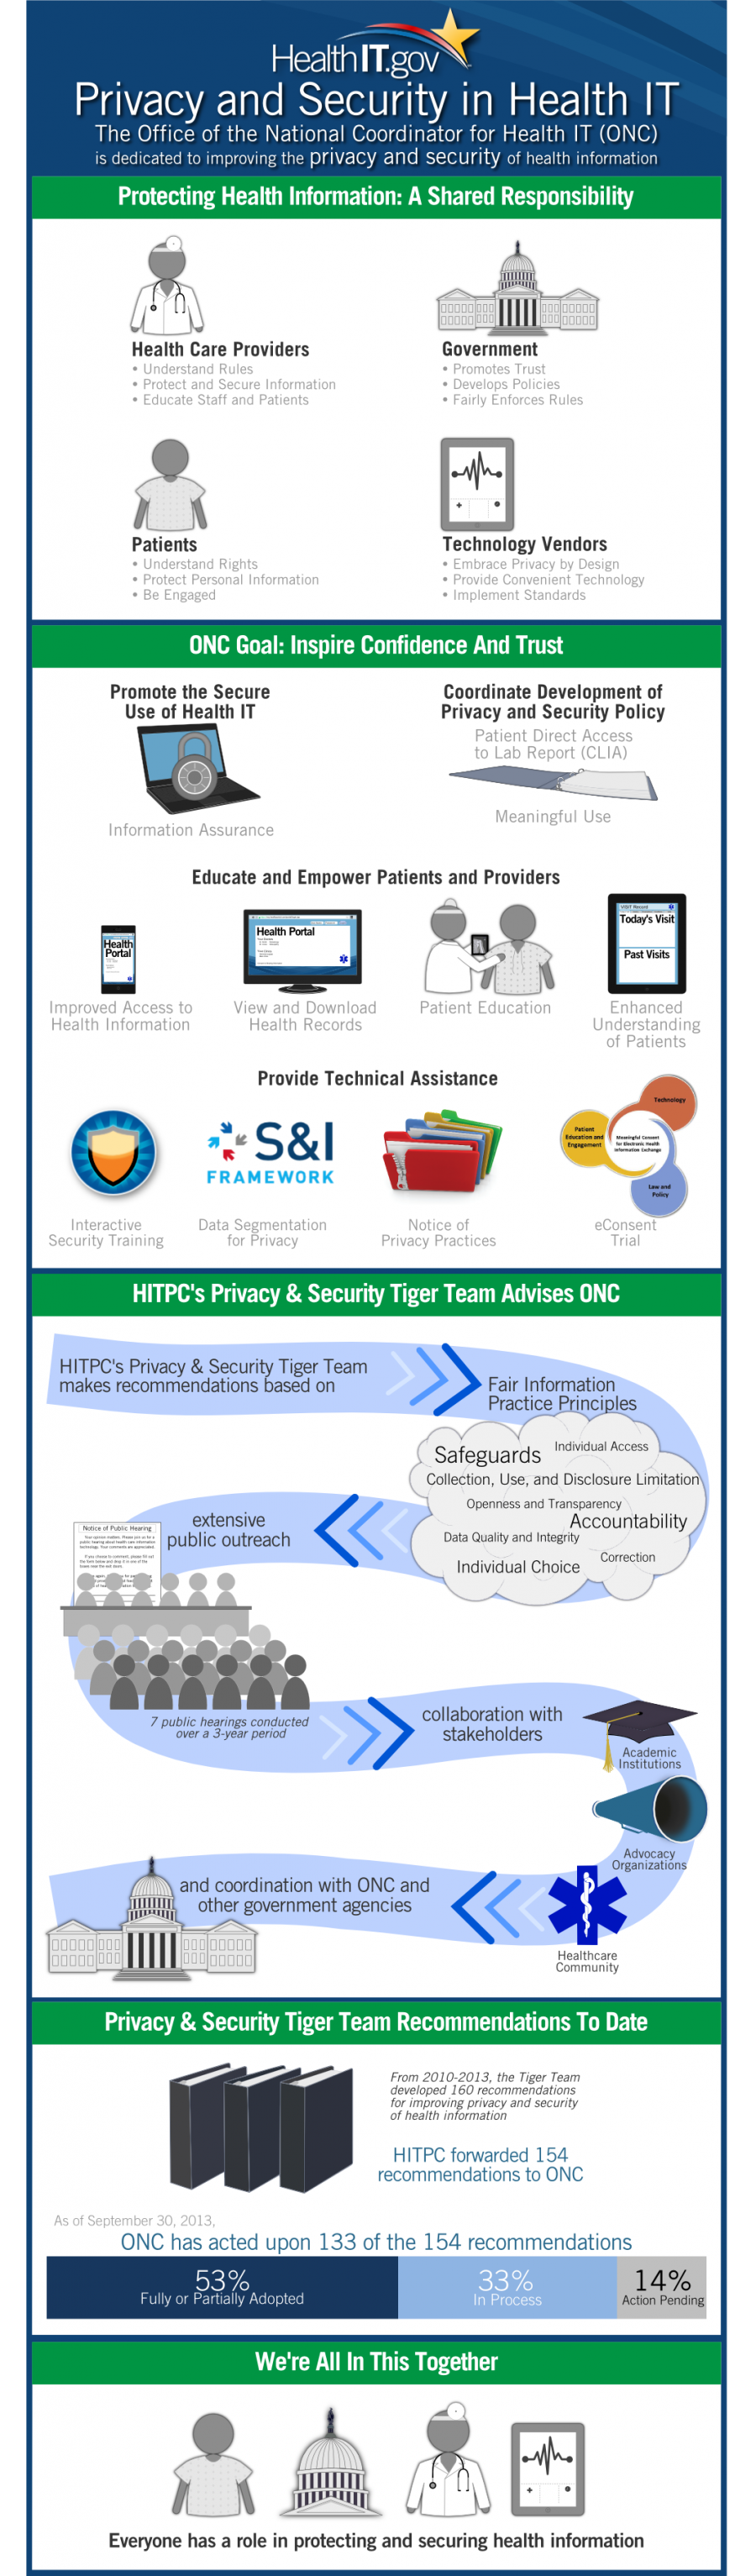 ONC Advances Privacy and Security in Health IT Infographic